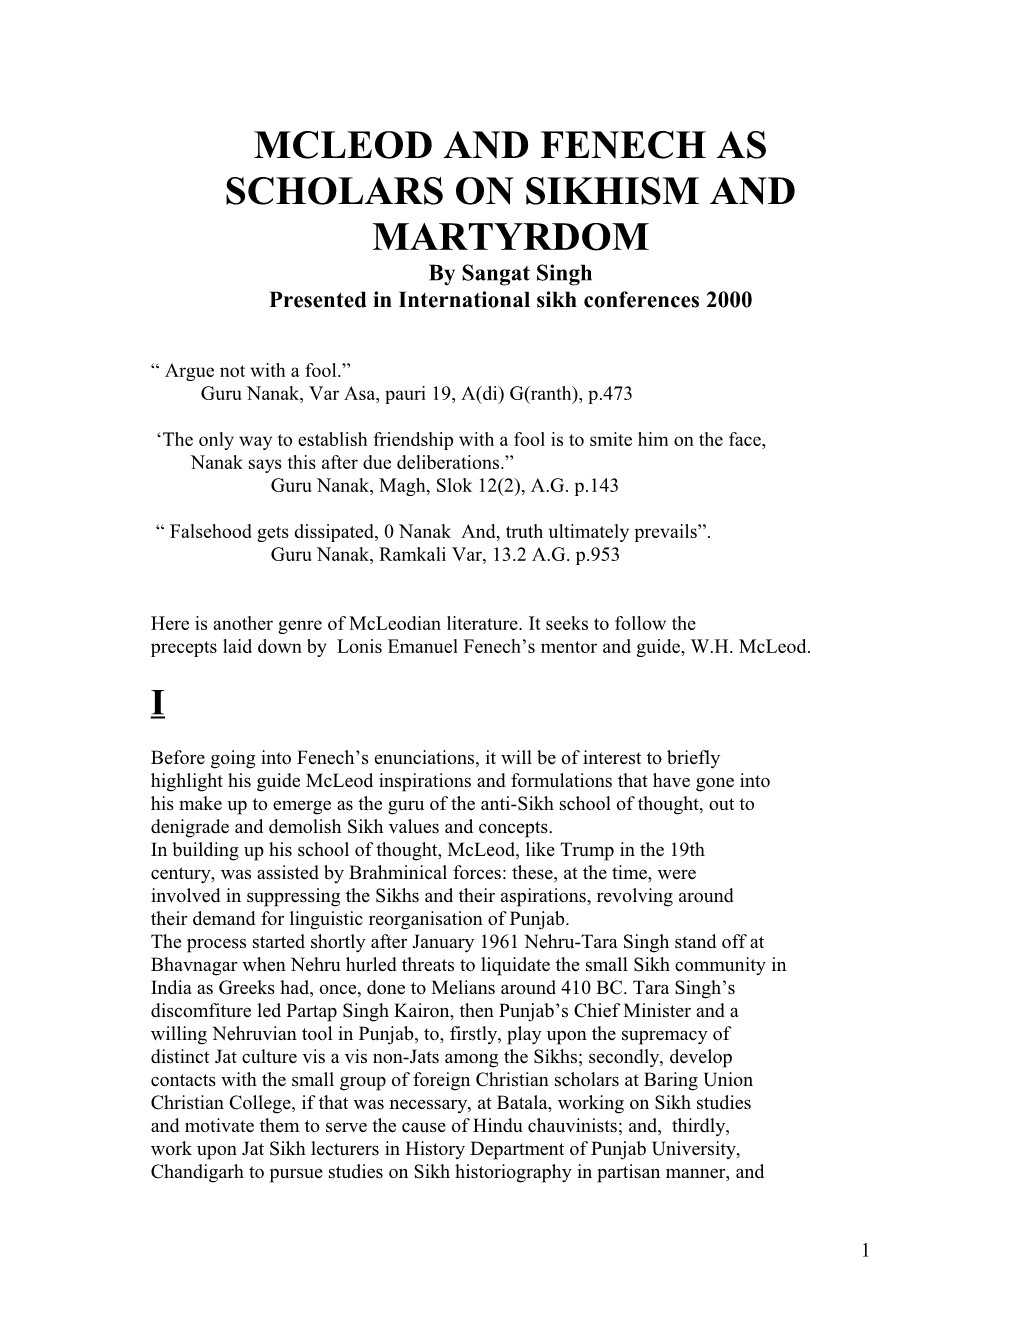 Mcleod and Fenech As Scholars on Sikhism and Martyrdom